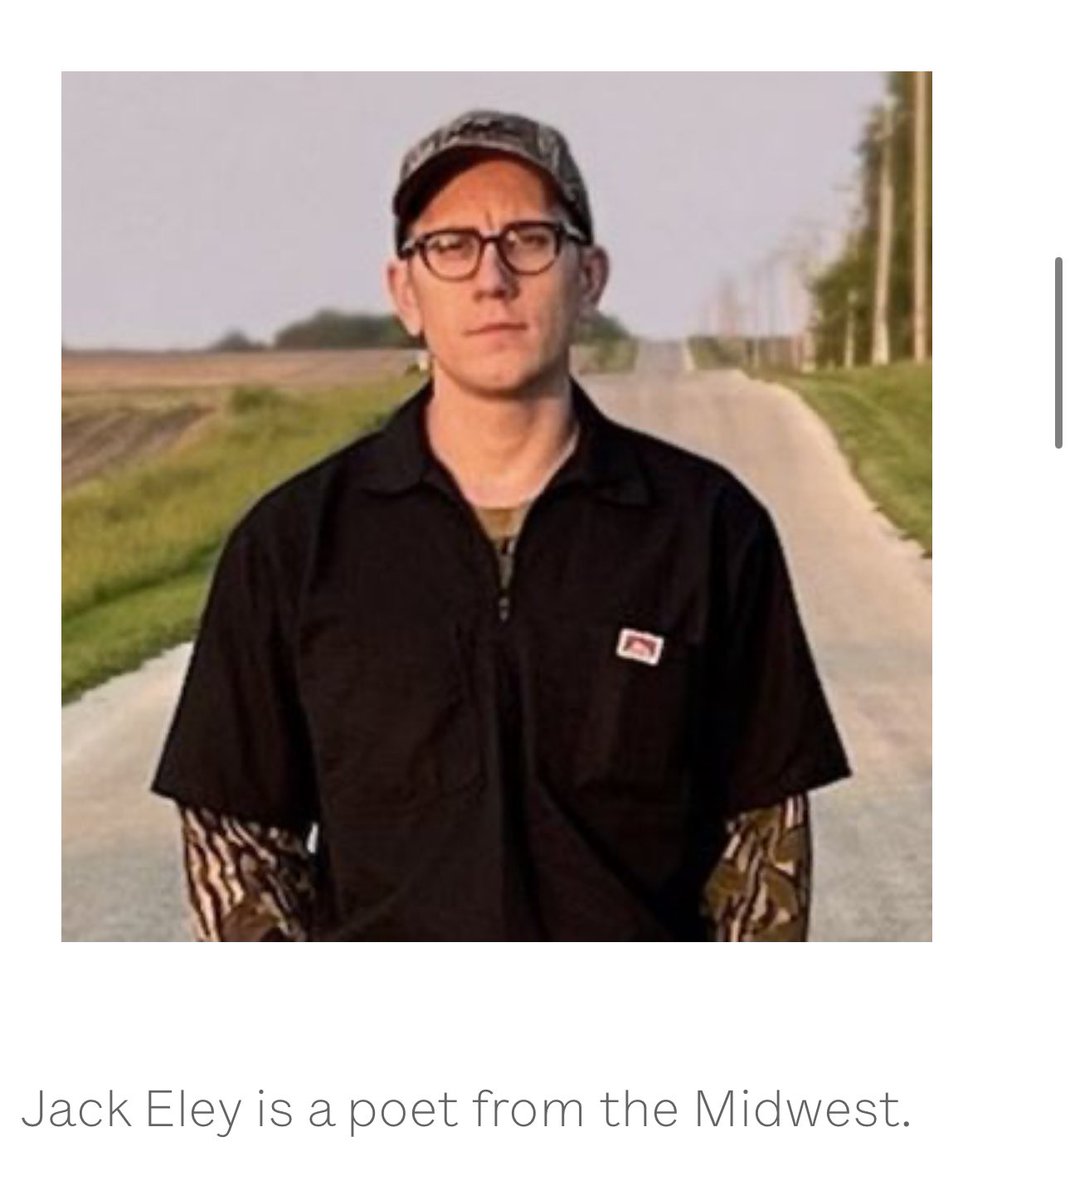 @alexstein99 @alexstein69420 allow me to introduce you to your other attacker, Jack Eley. He was previously arrested at a “Shariah Law Demonstration” in Denver. denverpost.com/2017/06/12/sha…